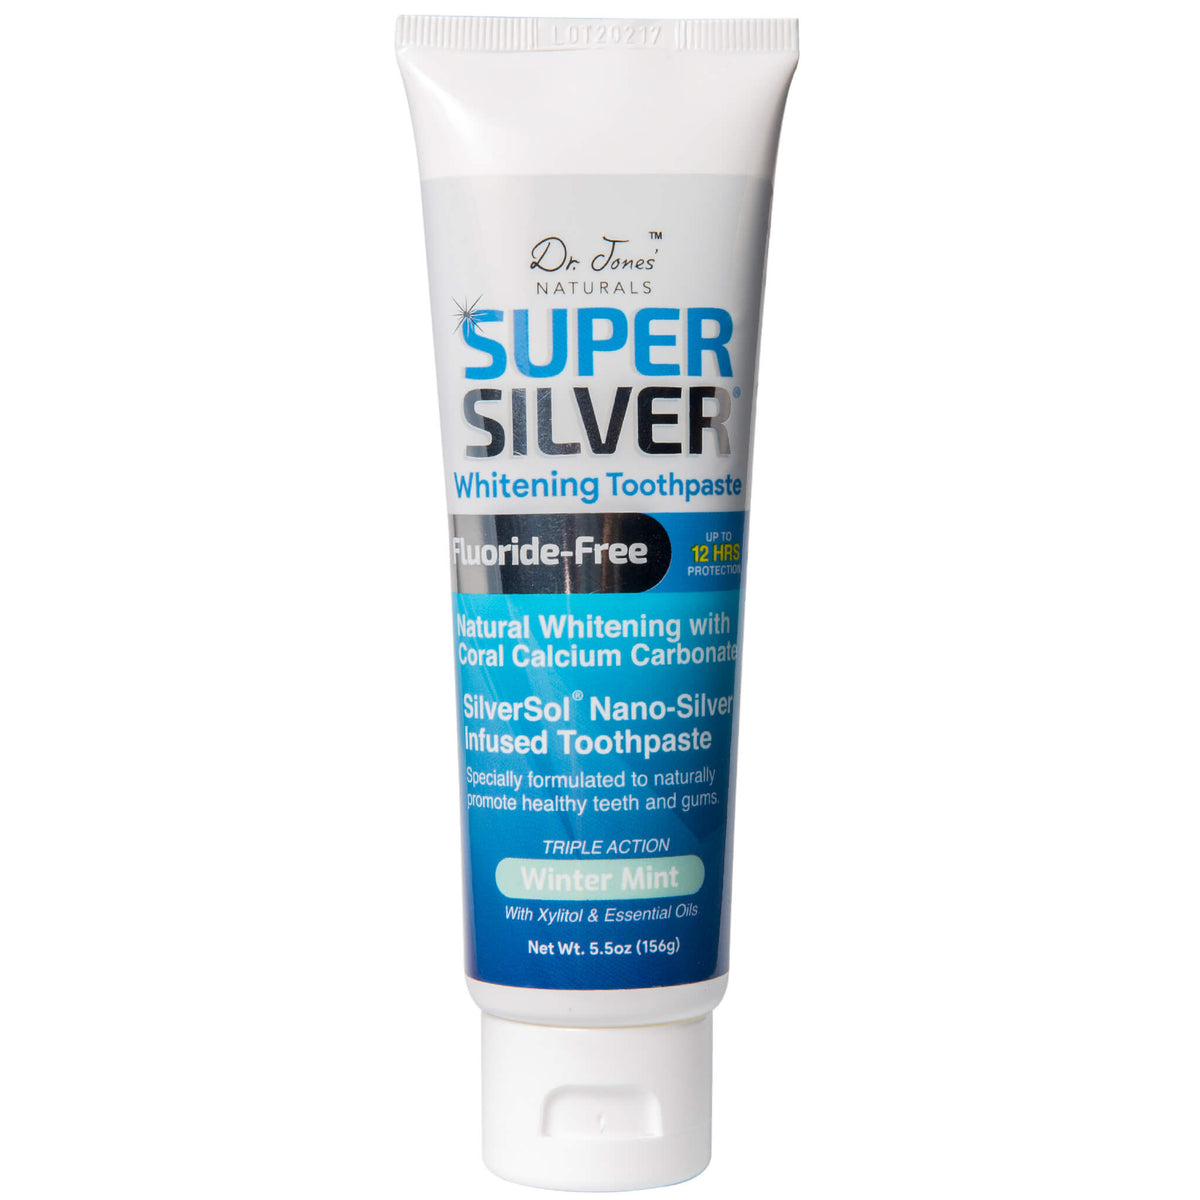  SuperSilver Whitening Toothpaste With Coral Calcium Carbonate